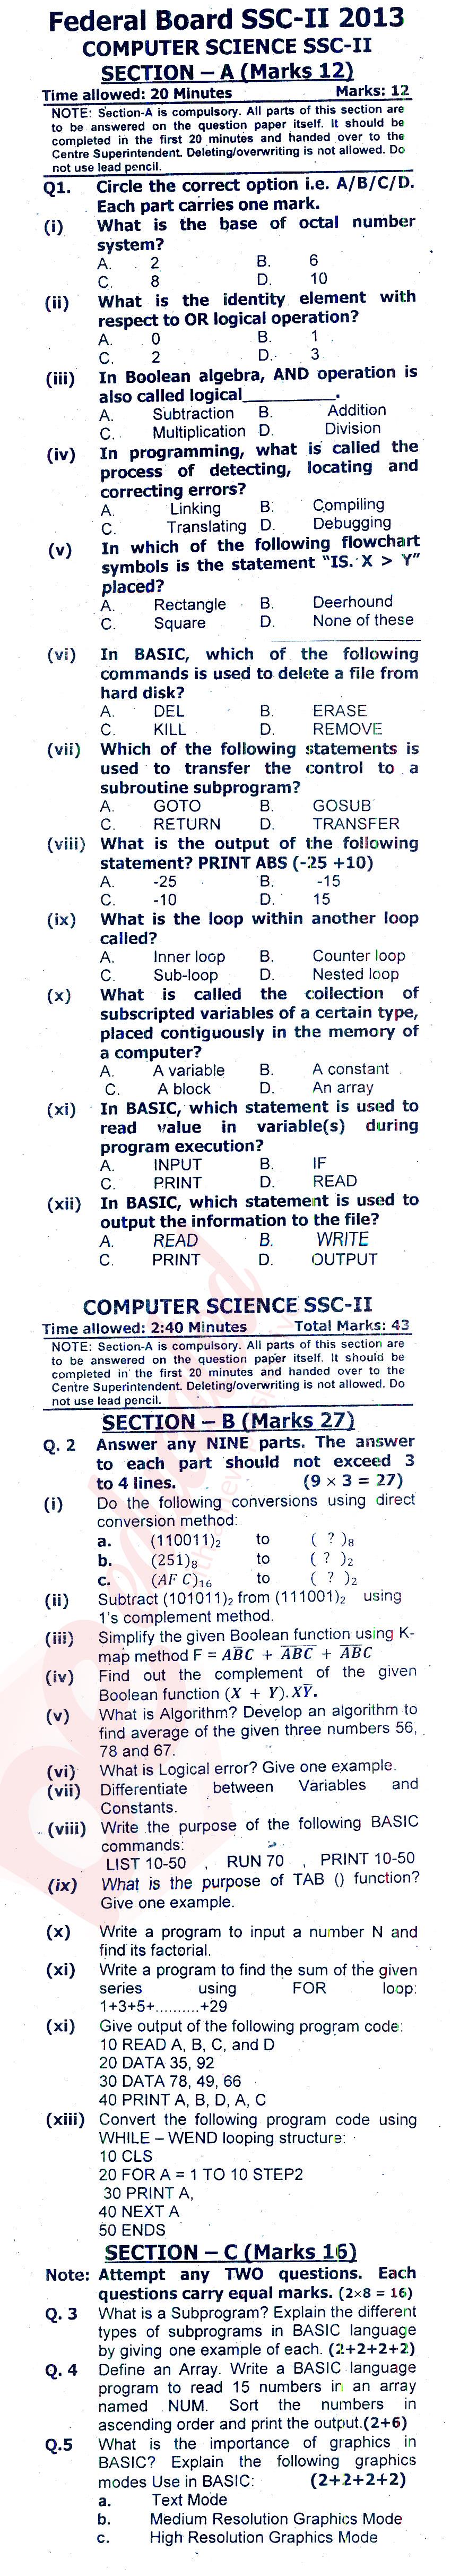 Computer Science 10th class Past Paper Group 1 Federal BISE  2013